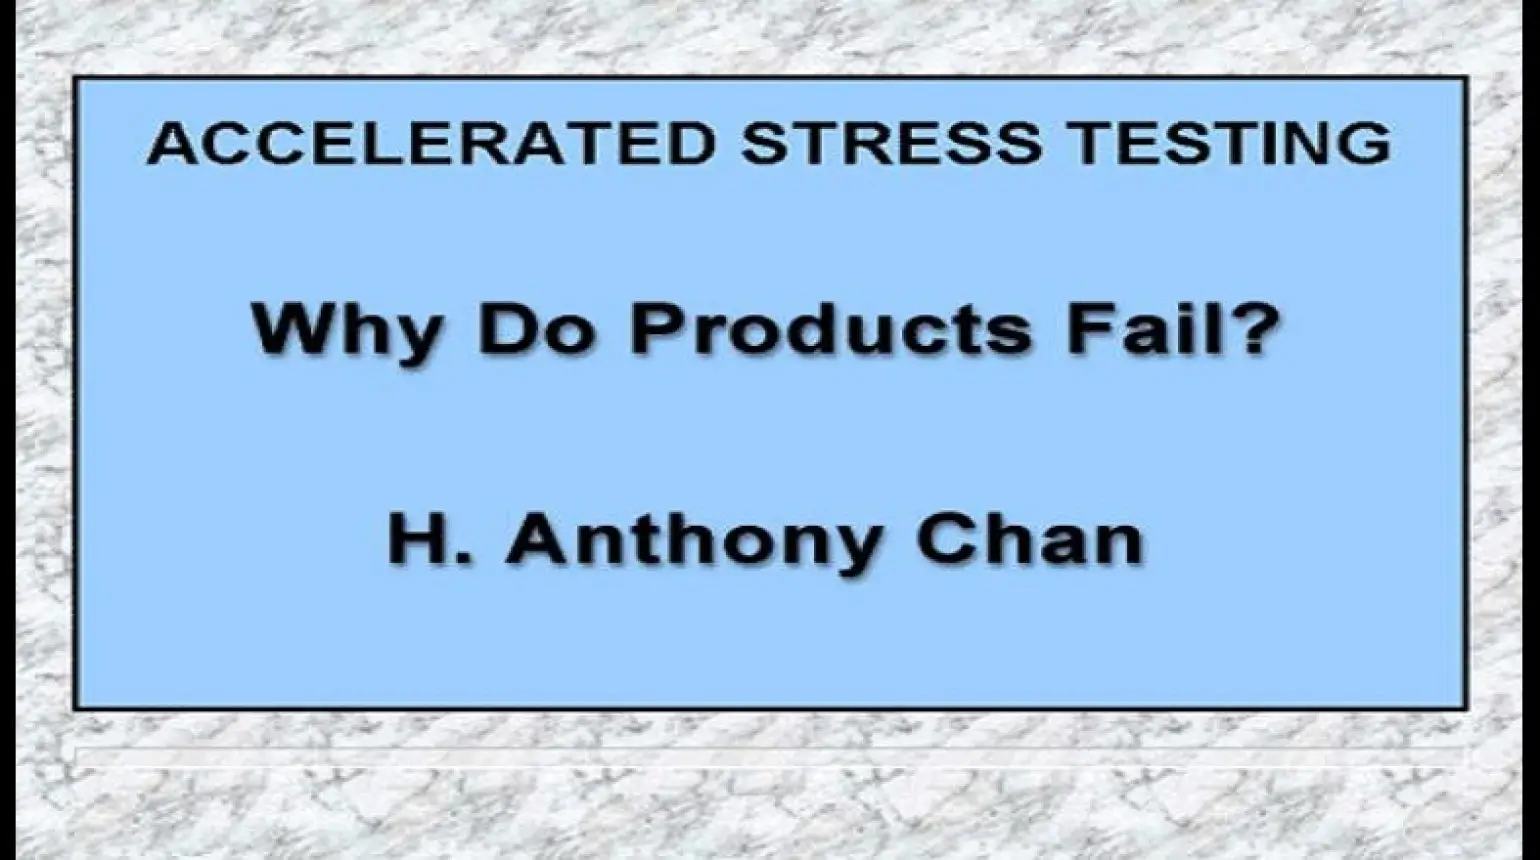 Why Do Products Fail?